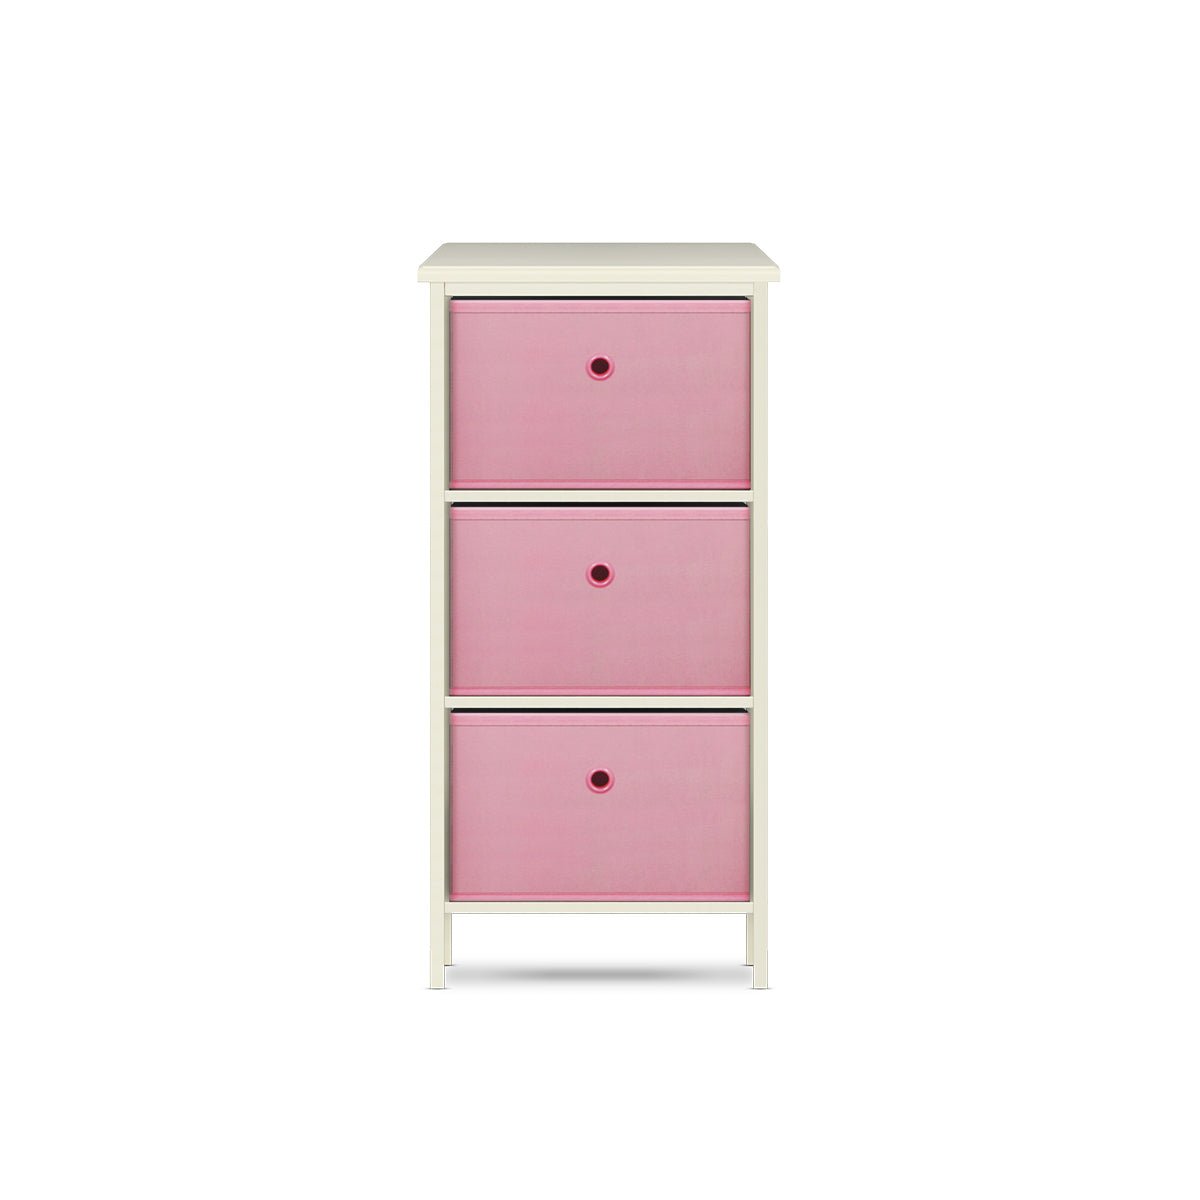 Home Master 3 Drawer Pine Wood Storage Chest Pink Fabric Baskets 70 x 80cm - Little Kids Business